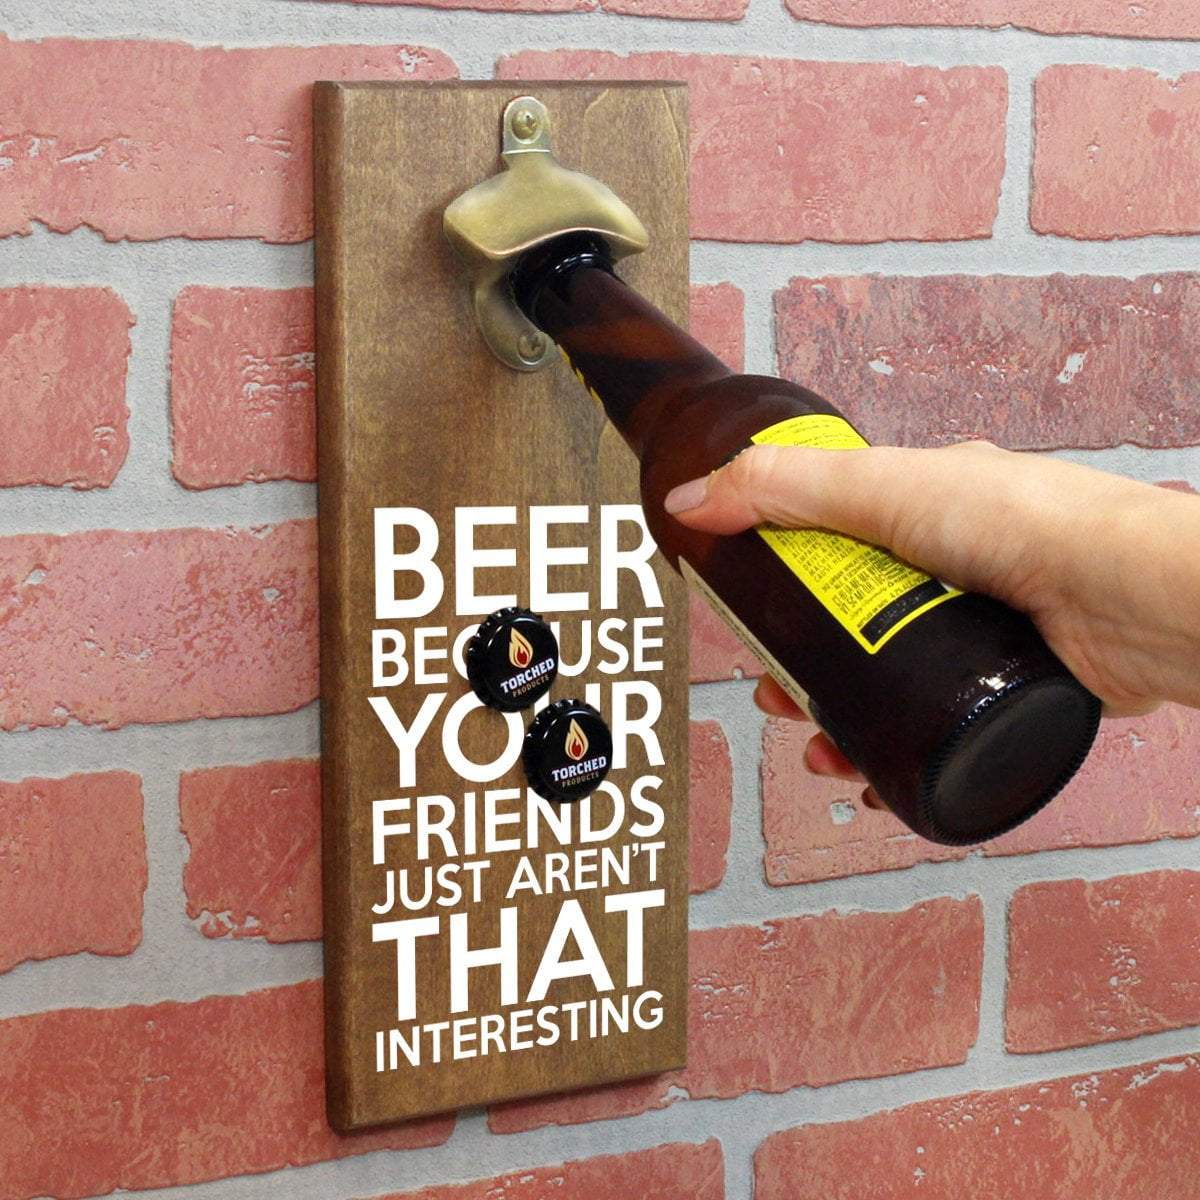 Torched Products Bottle Opener Beer Because Your Friends Just Aren't That Interesting Bottle Opener (1787772829745)